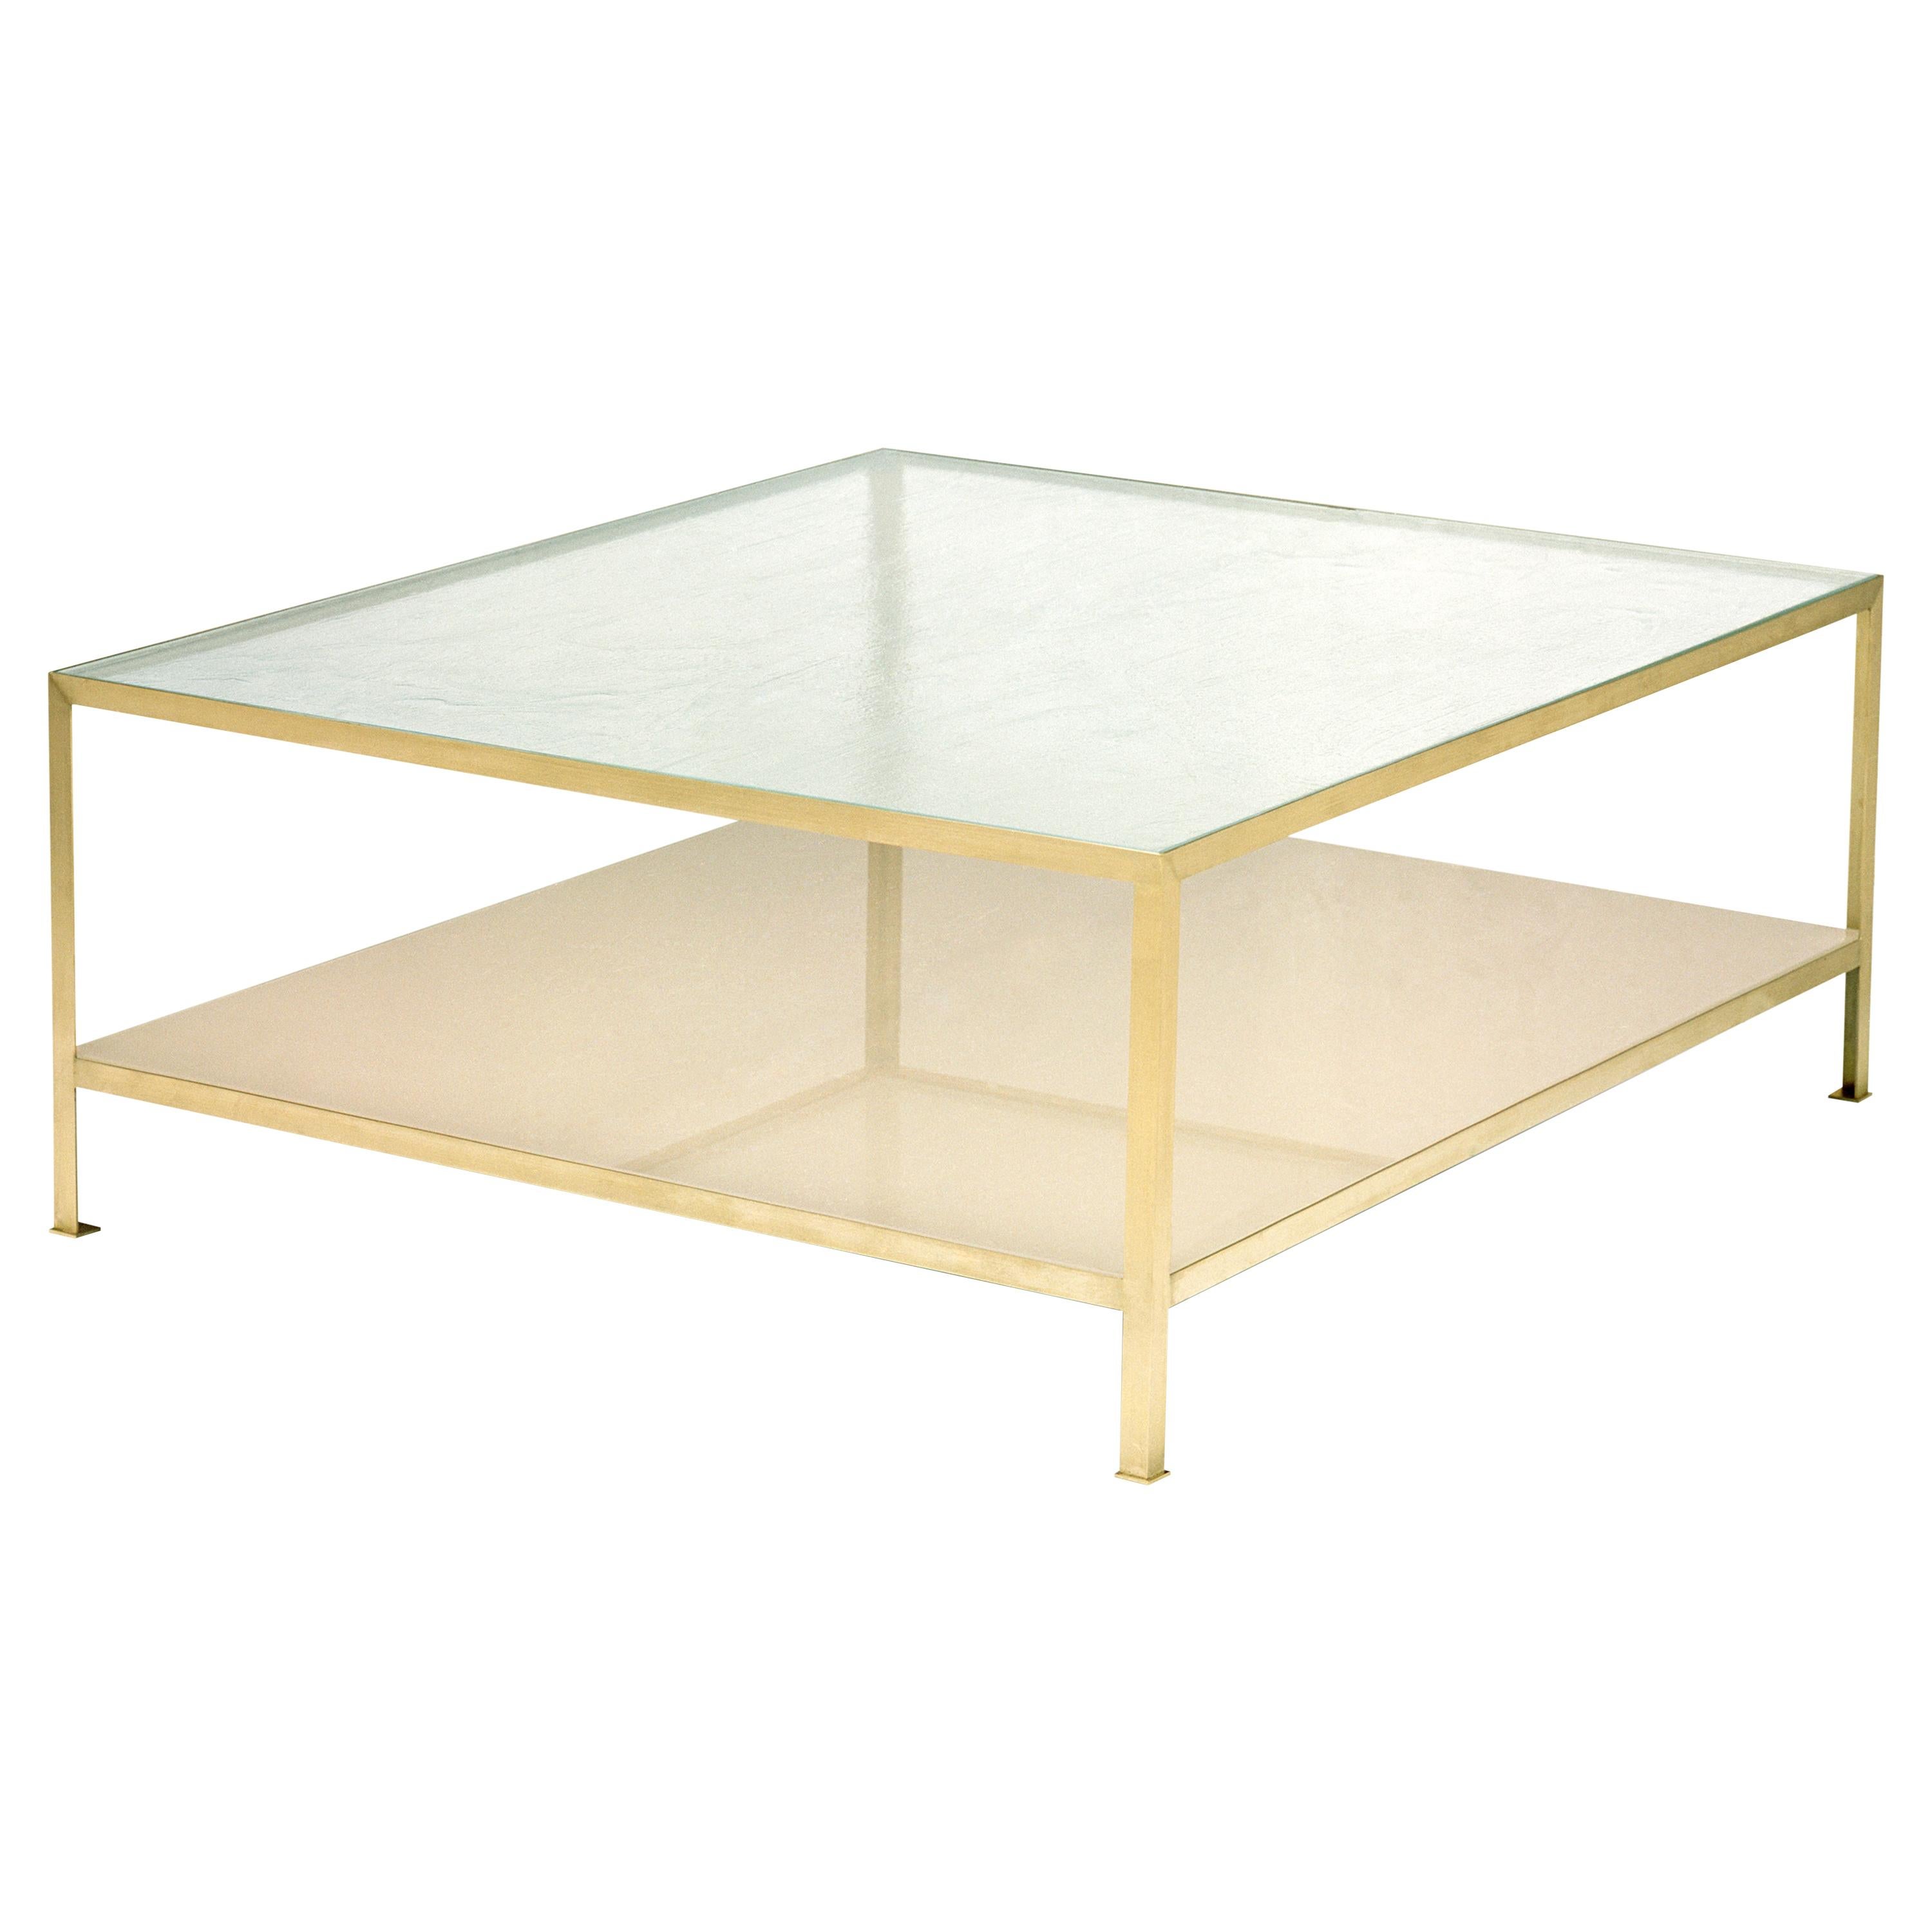 90° Glass & Metal Large Square Coffee Table, Vica designed by Annabelle Selldorf